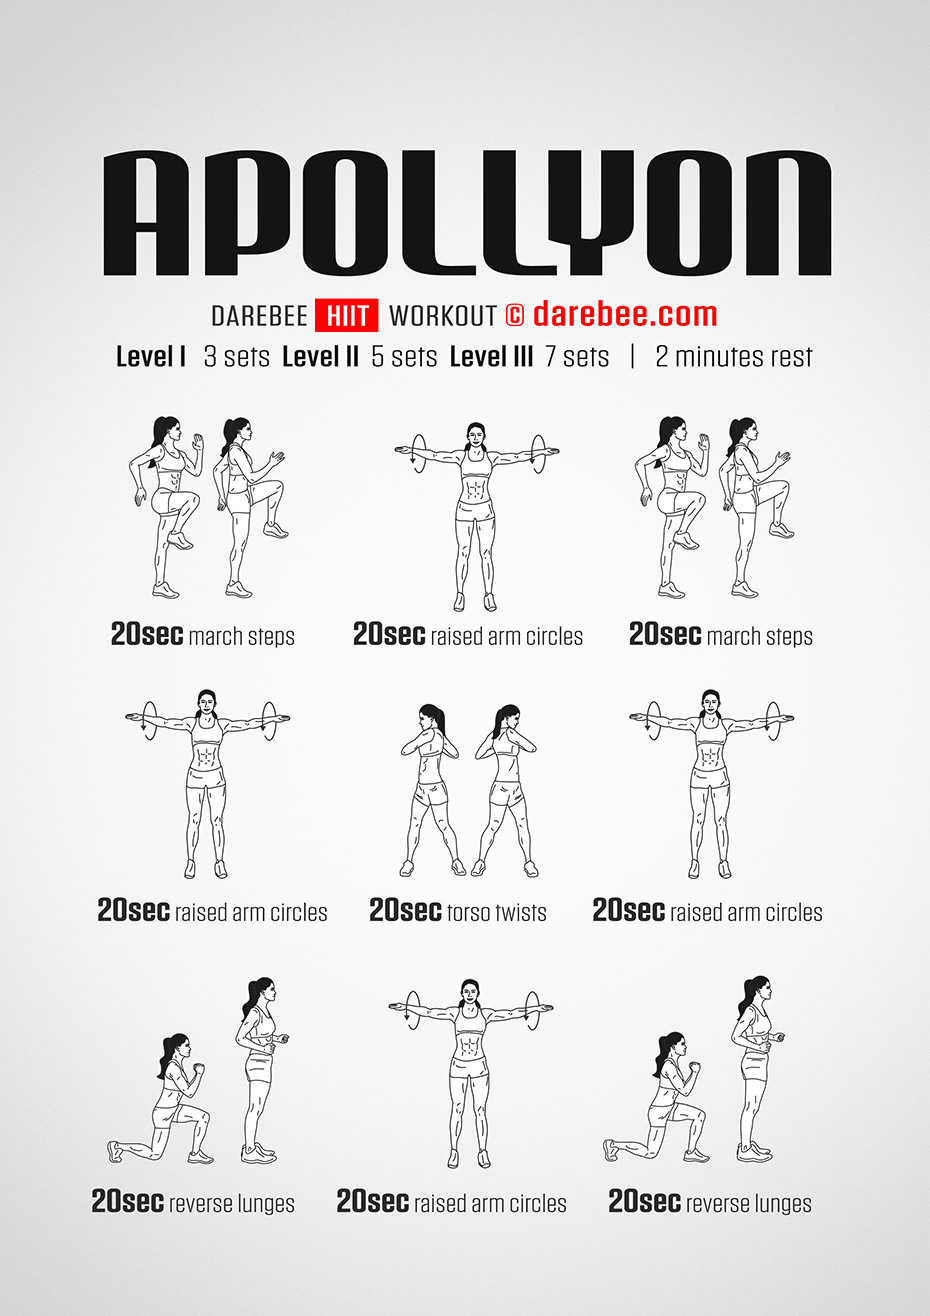 Apollyon is a free HIIT workout by Darebee